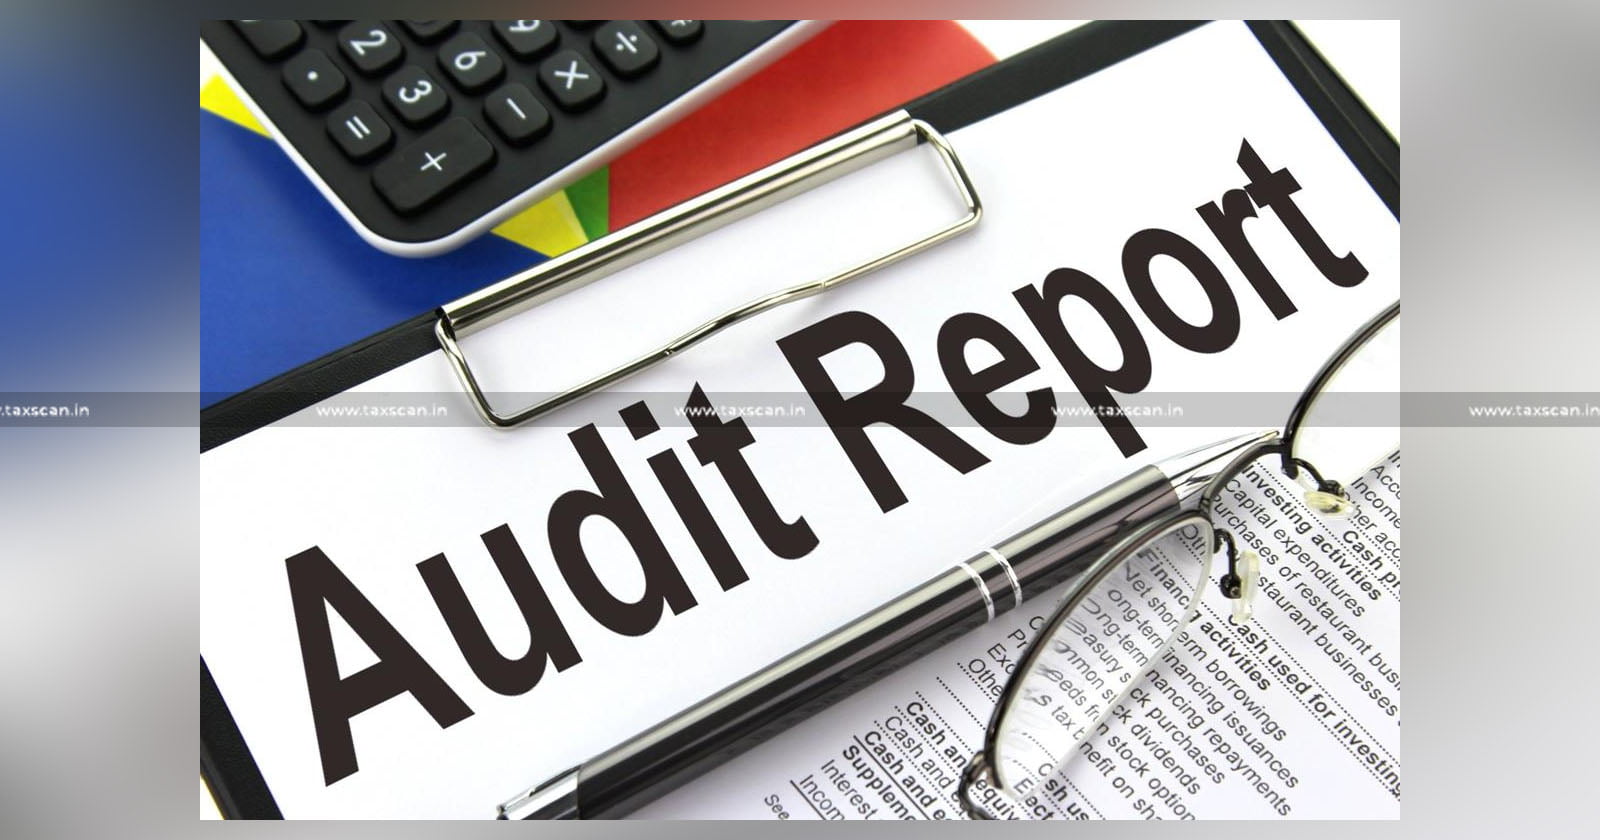 Rectification - Filing of Audit Report - Audit Report - Completion of Assessment - Assessment - ITAT - Tax Exemption - Trust - Taxscan